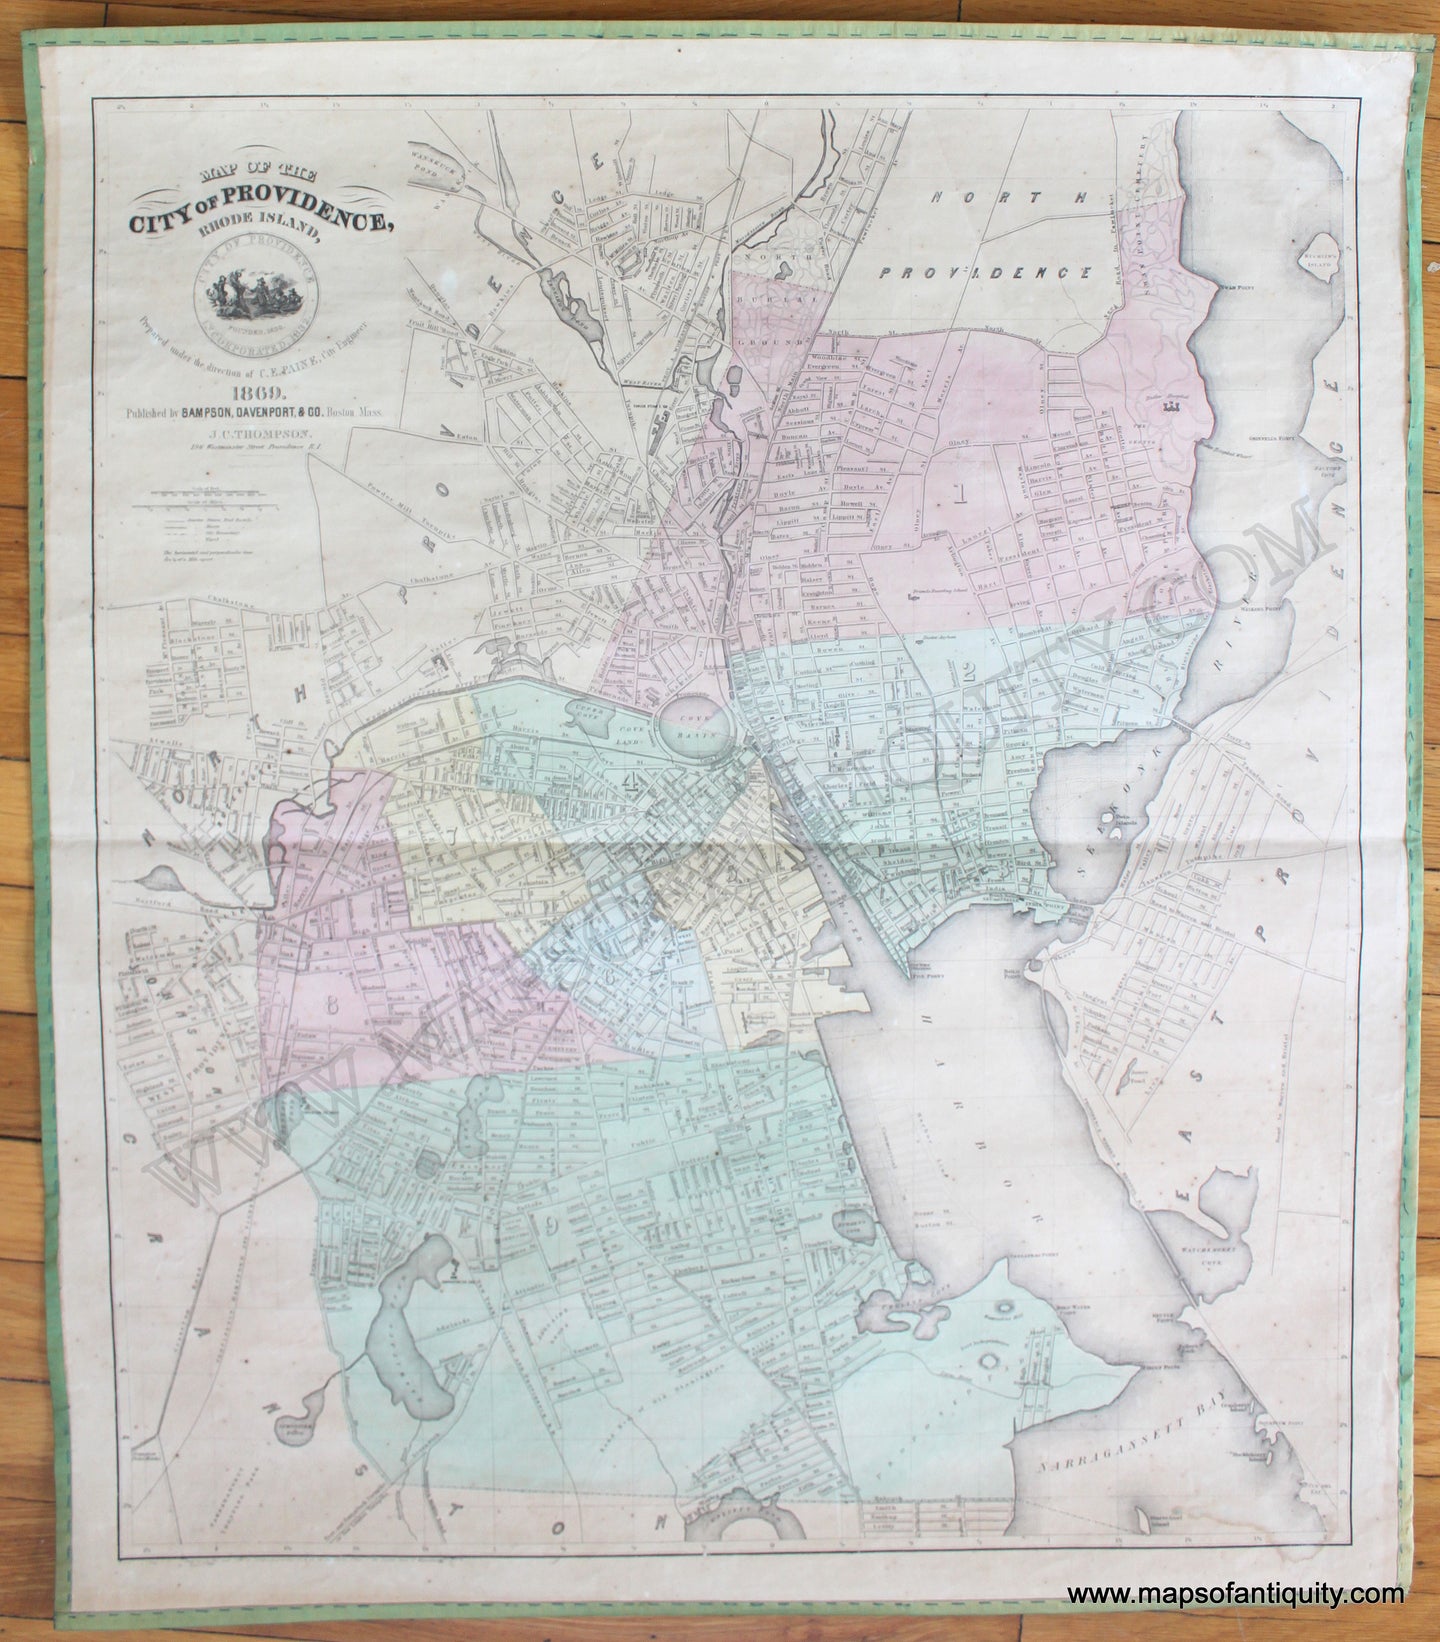 Antique-Hand-Colored-Wall-Map-Map-of-the-City-of-Providence-Rhode-Island.-1869-Sampson-Davenport-&-Co.-Rhode-Island-1800s-19th-century-Maps-of-Antiquity